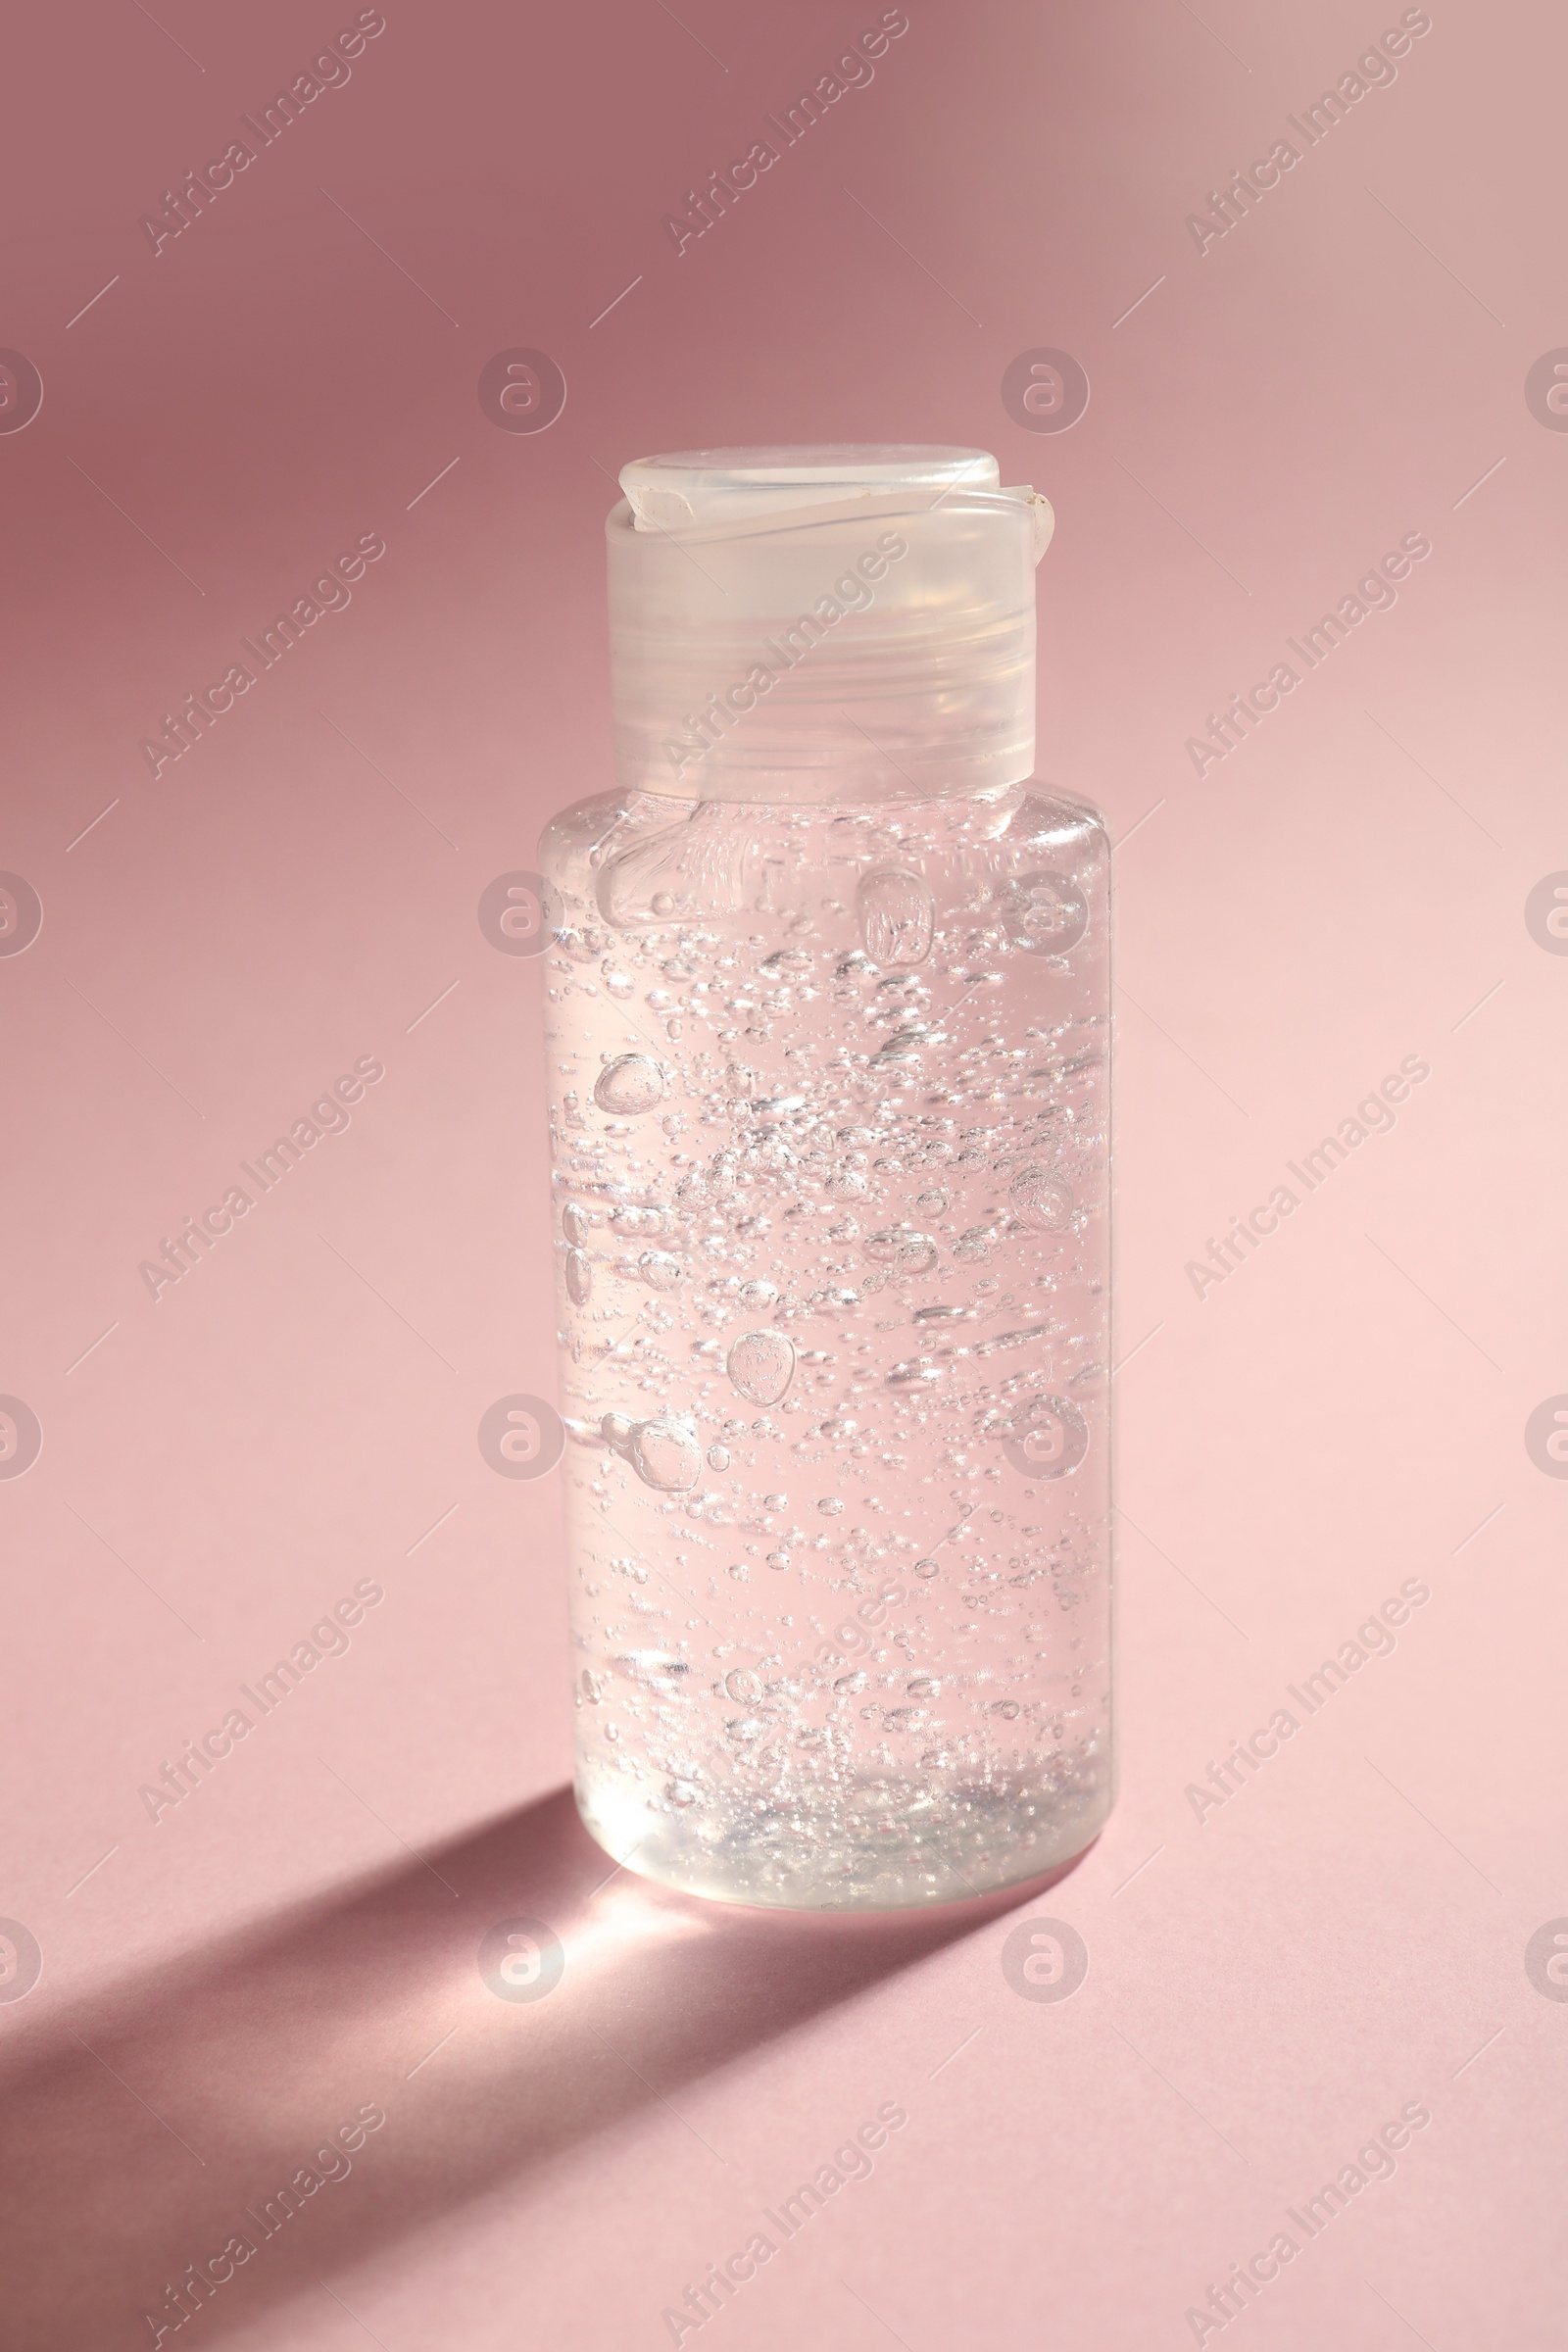 Photo of Bottle of cosmetic gel on pale pink background